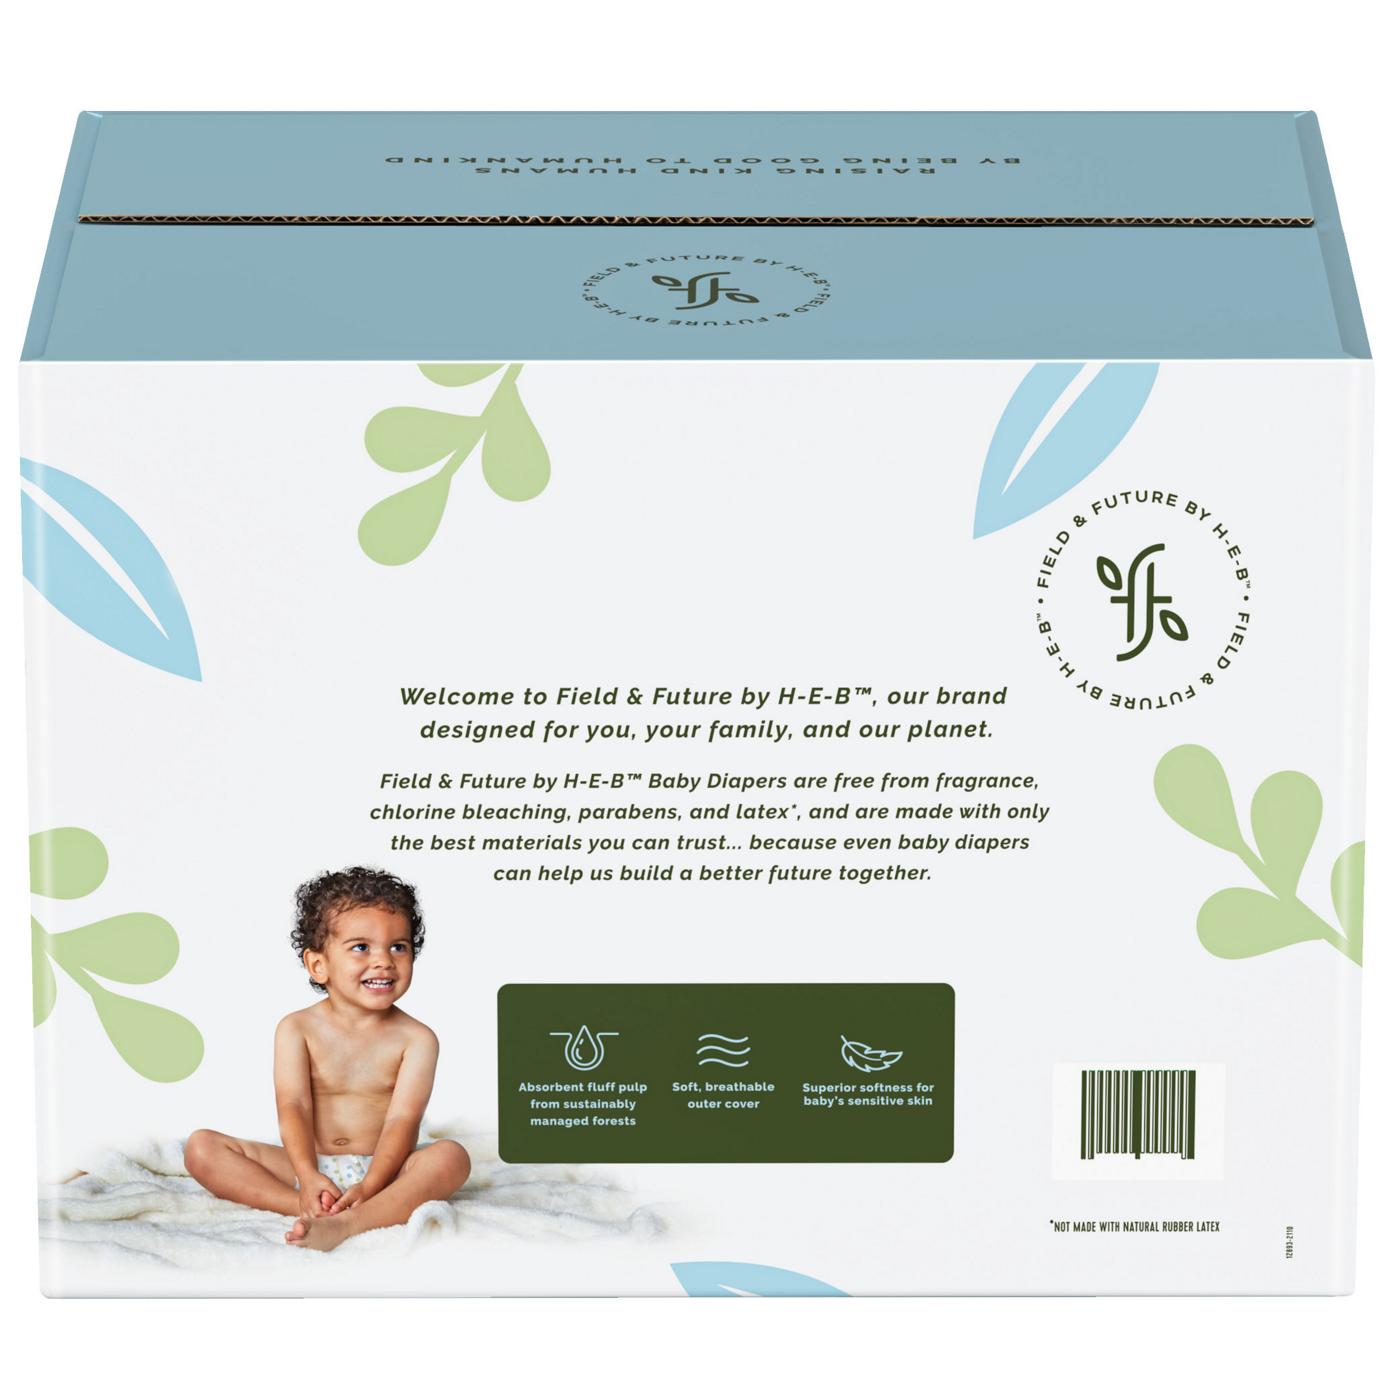 Field & Future by H-E-B Value Pack Baby Diapers  - Size 7; image 5 of 6